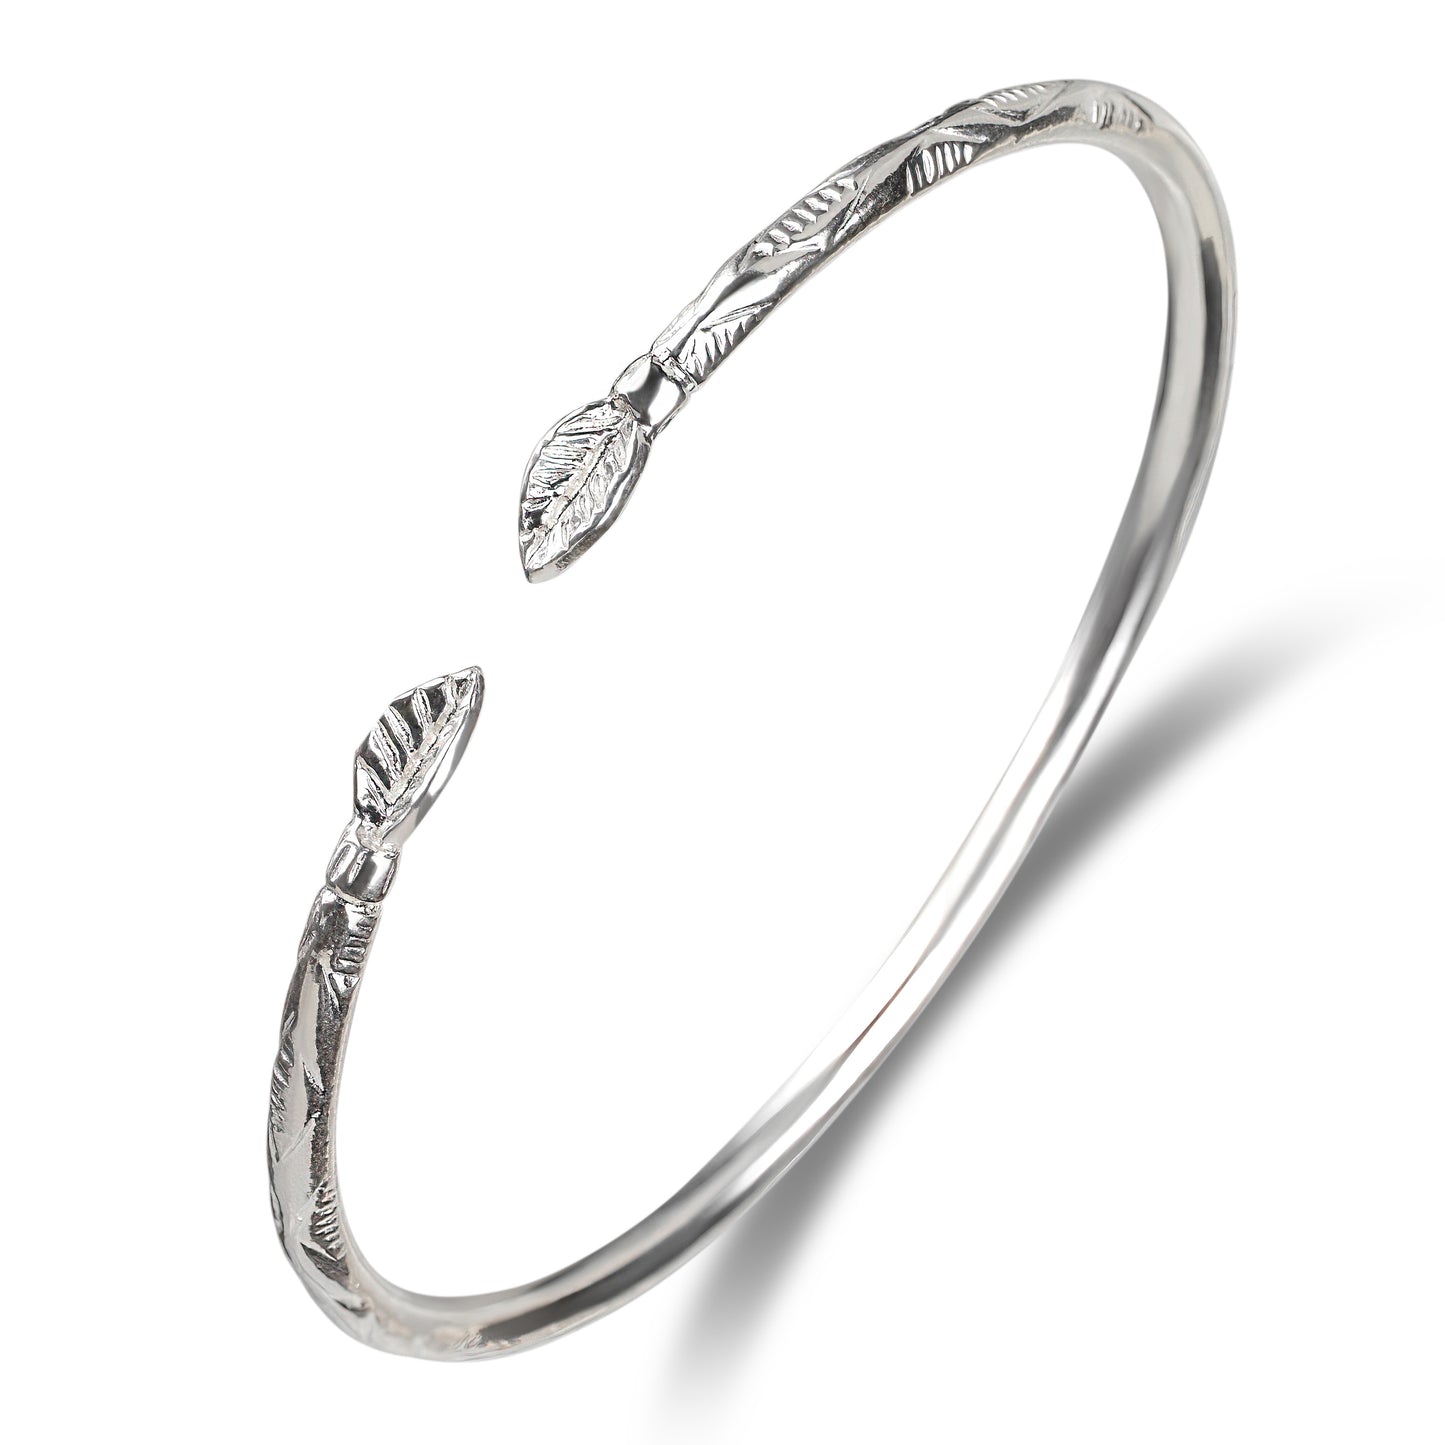 Better Jewelry Leaf .925 Sterling Silver West Indian Bangles (1 Bangle)